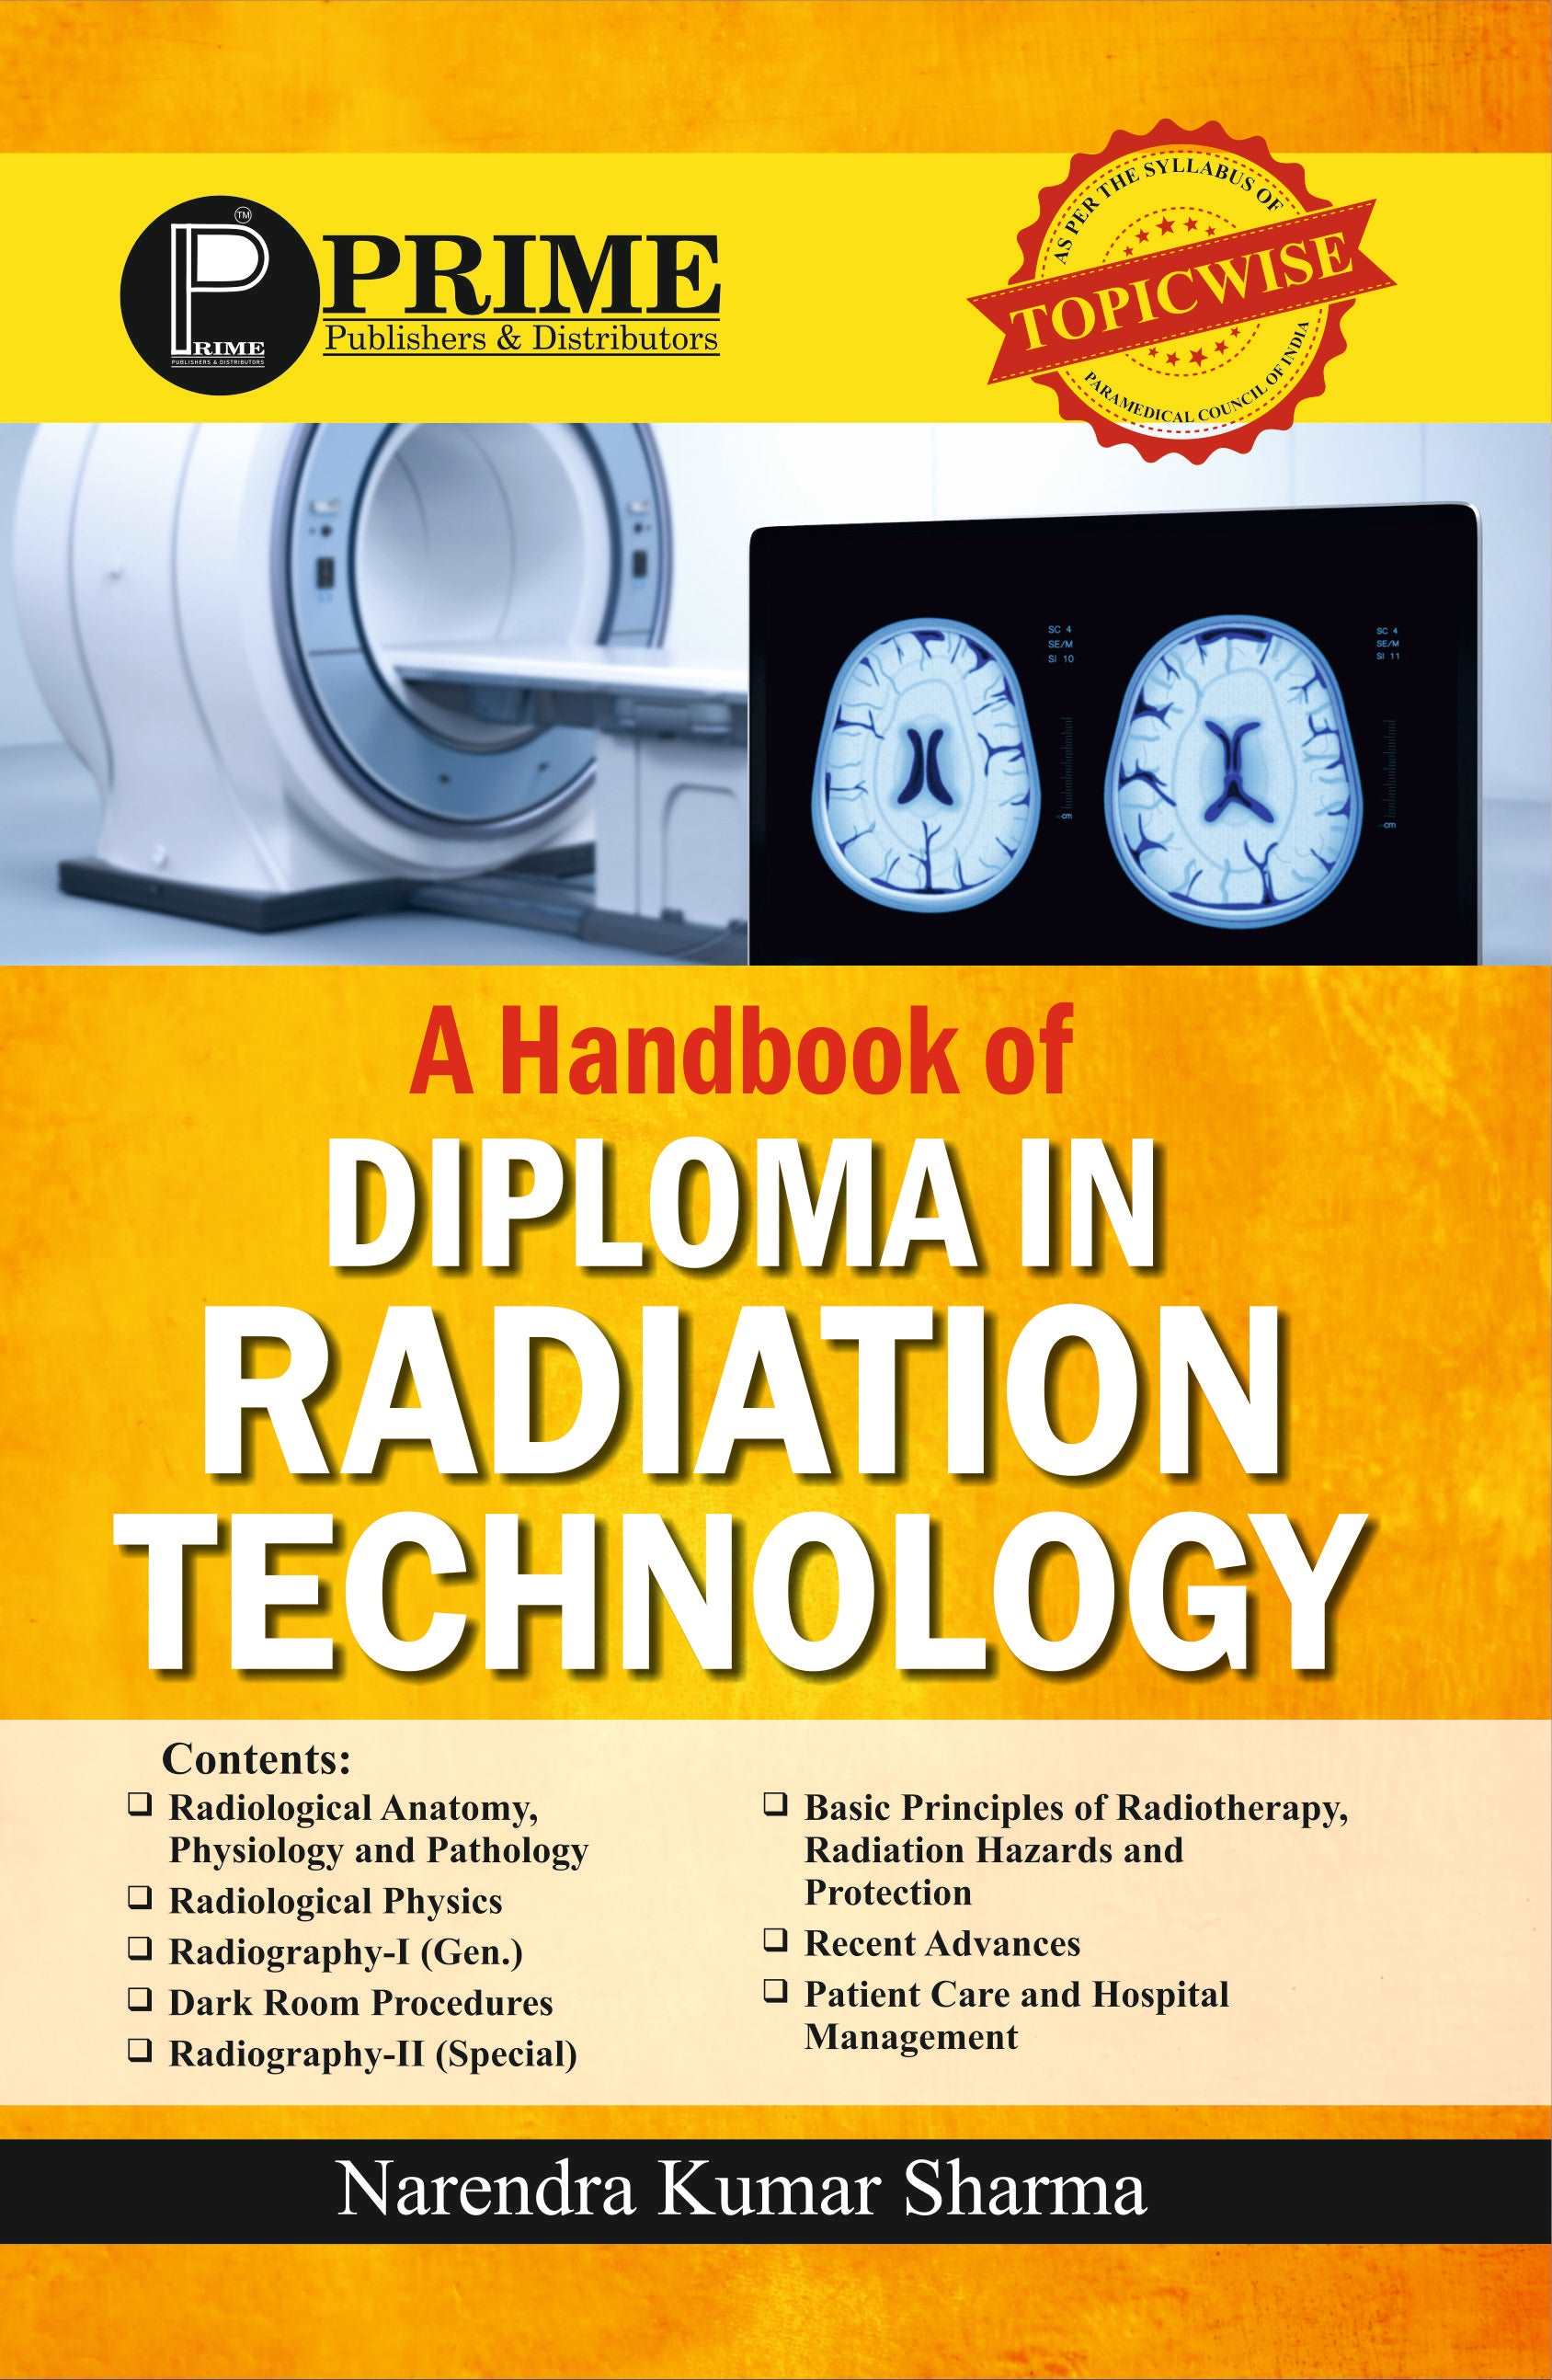 A handbook of Diploma in Radiation Technology